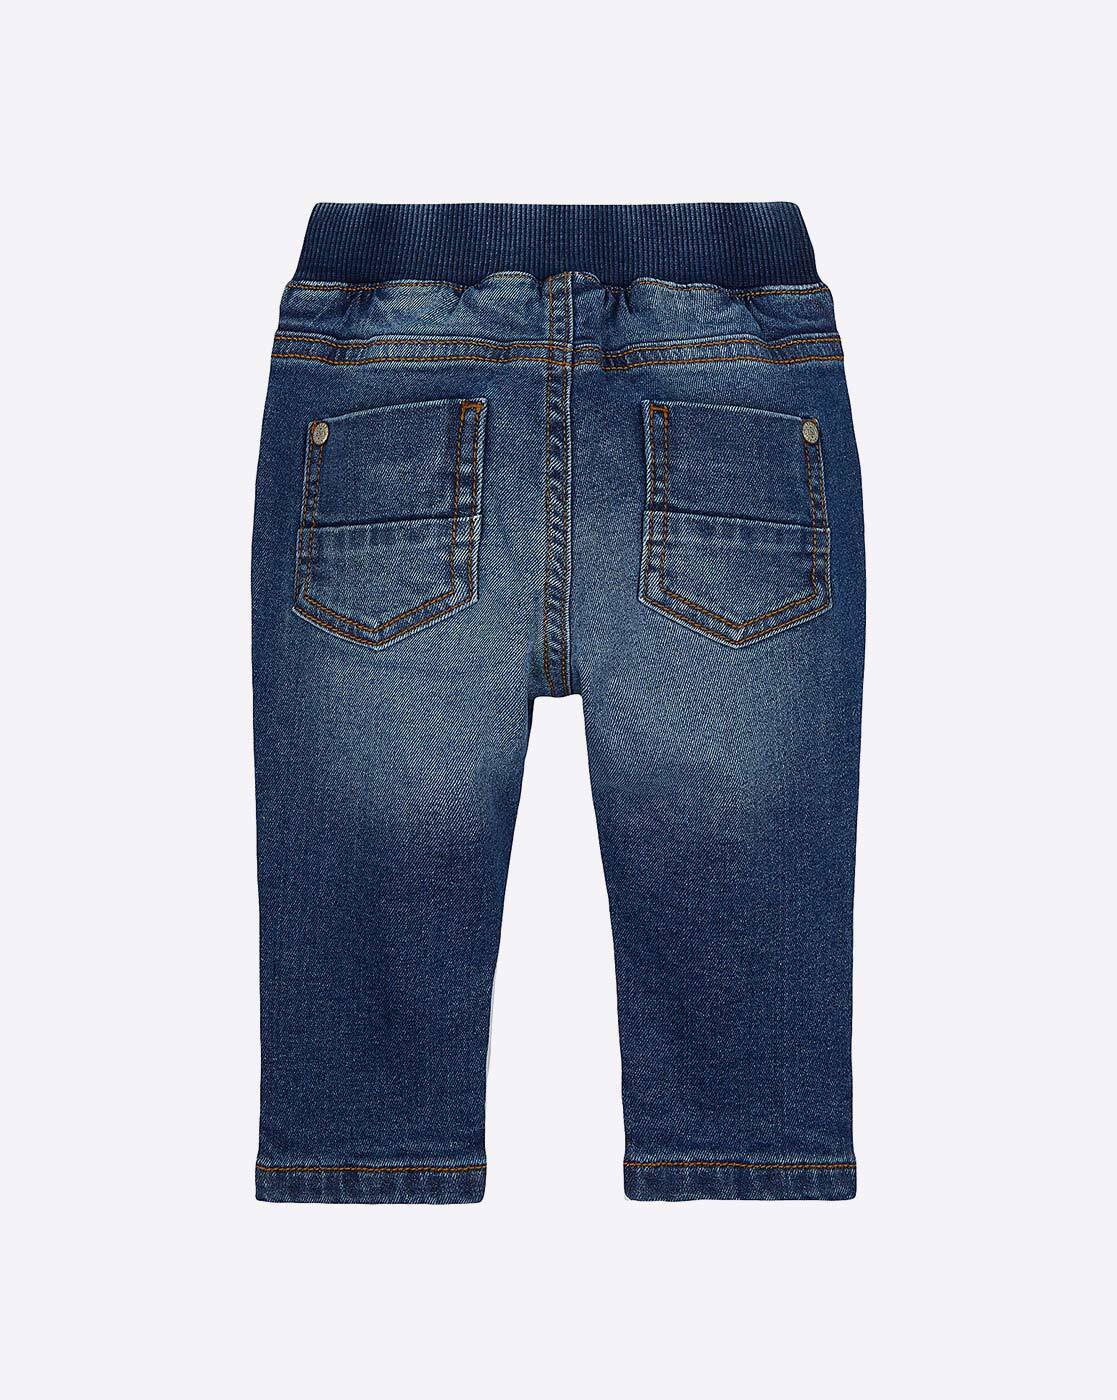 Buy Blue Jeans for Boys by Mothercare Online